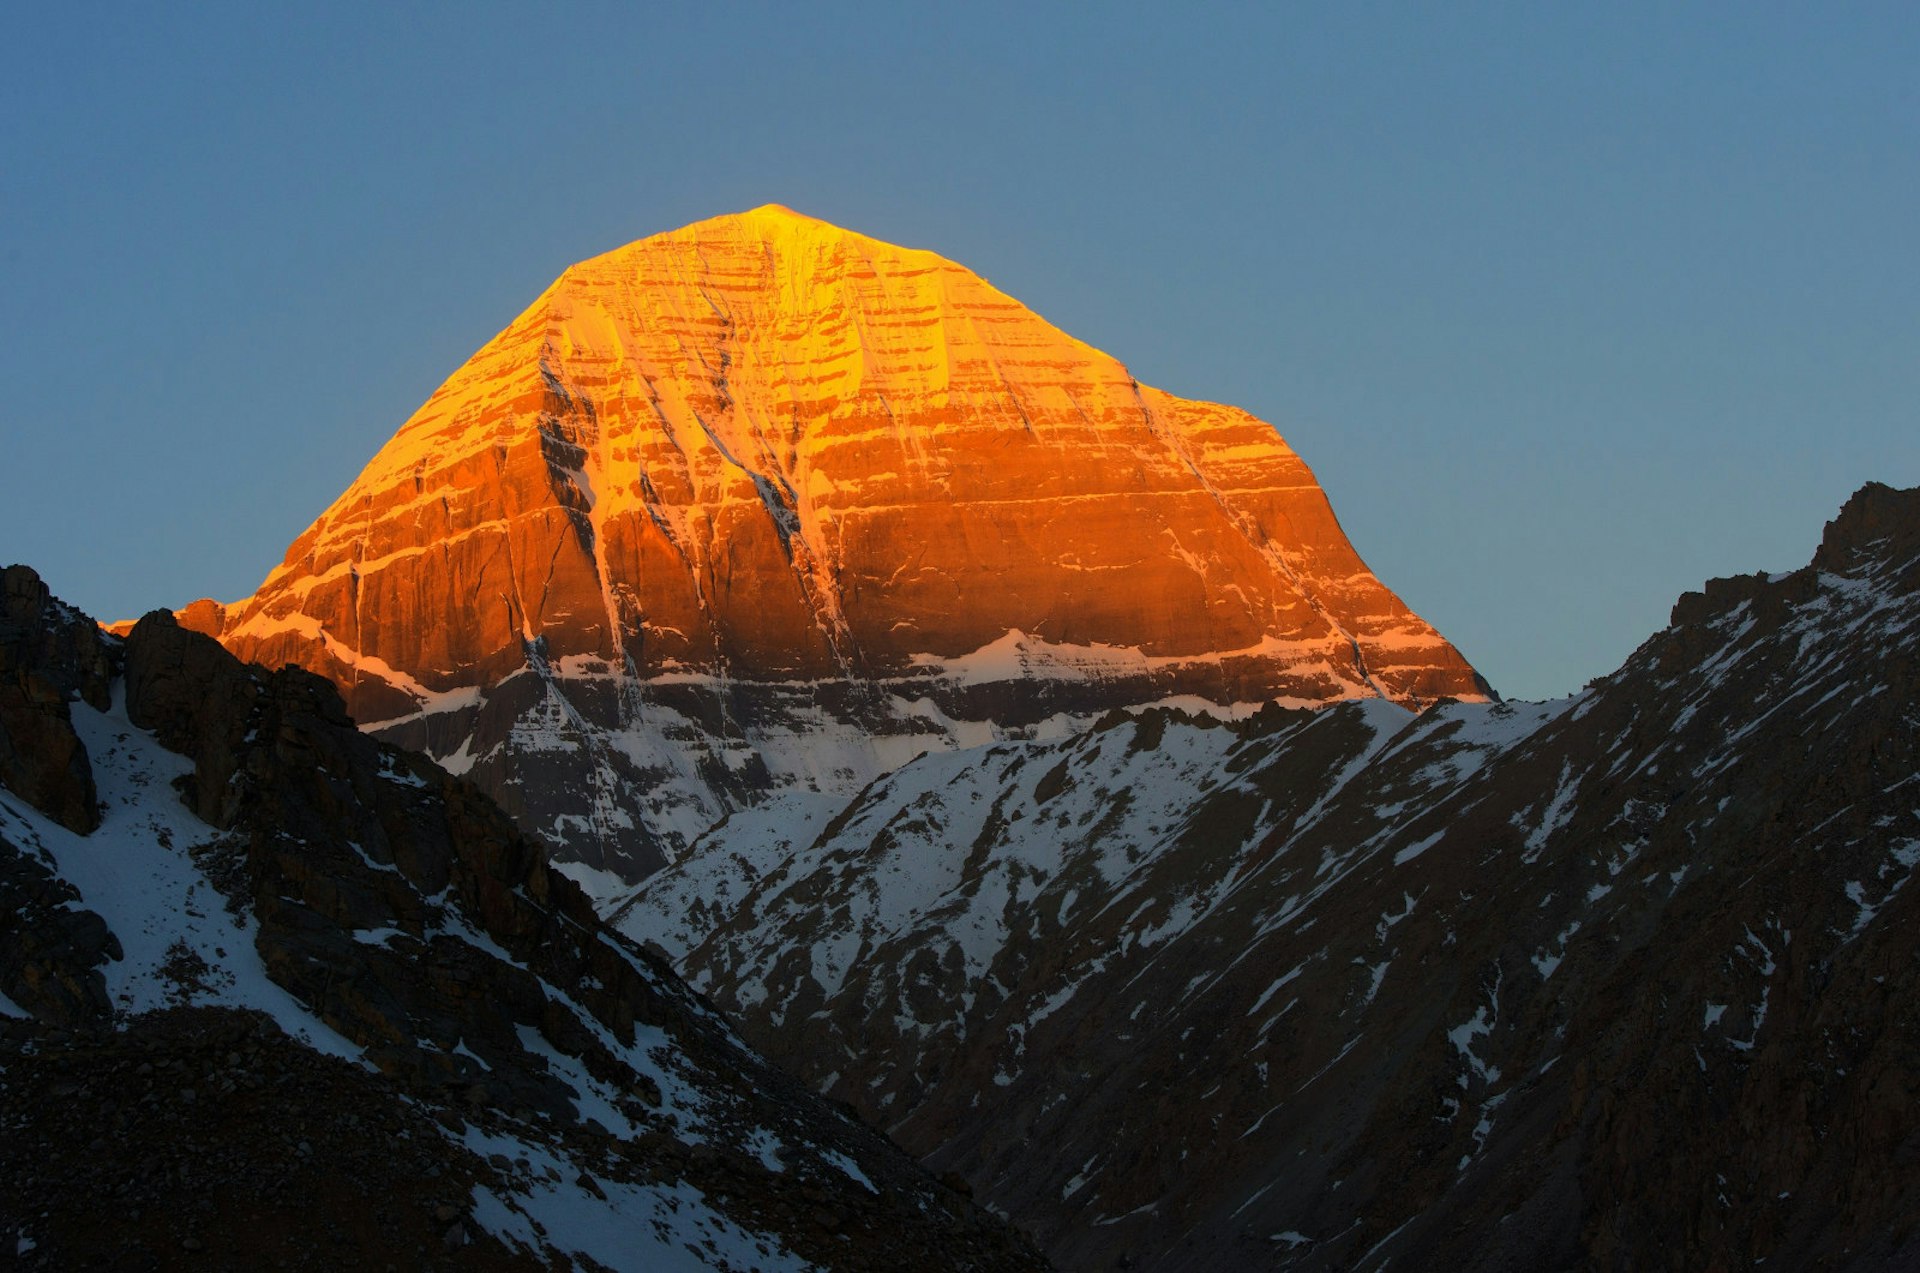 The peak of the mount Kailash seen in an orange light at dawn. The lower part of the mountain is in darkness and covered in snow.